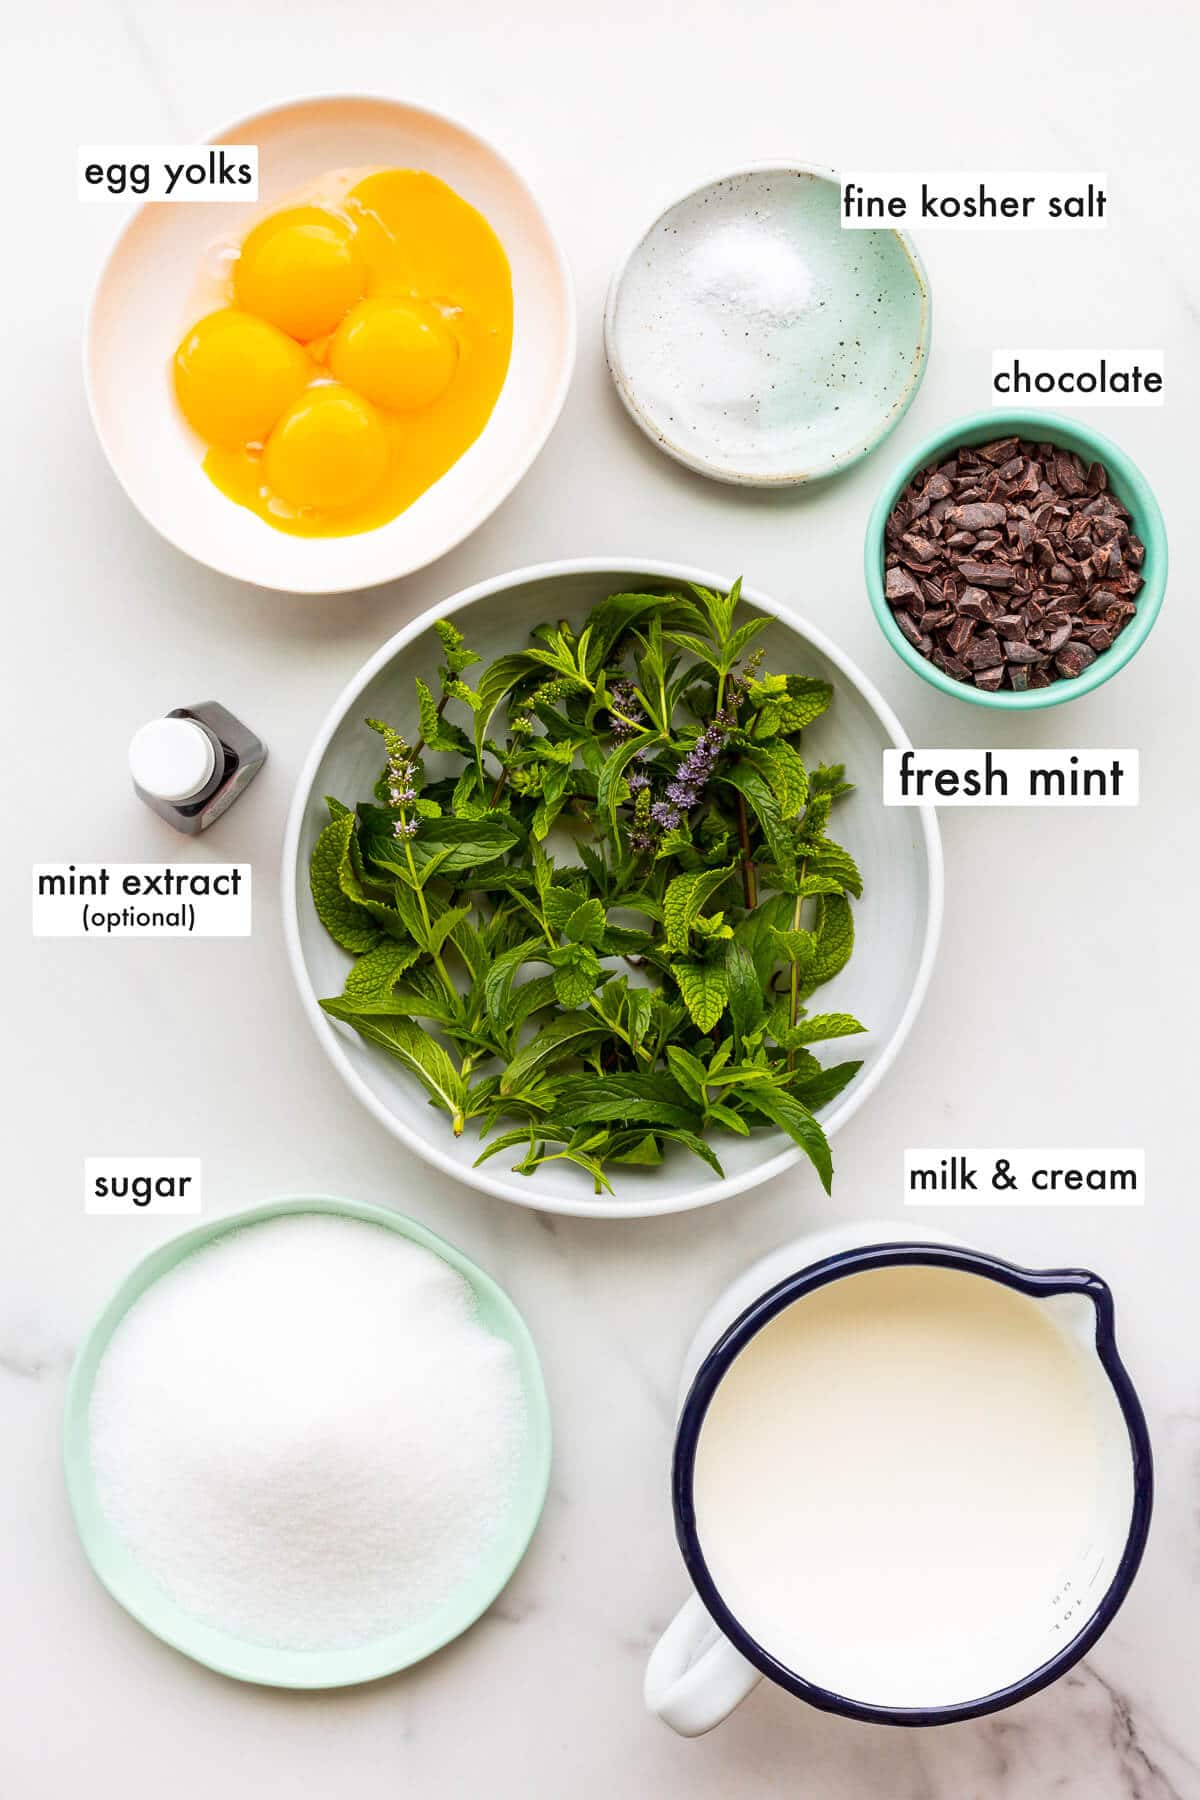 Ingredients for homemade mint chocolate chip ice cream measured out, including egg yolks, salt, fresh mint leaves, mint extract (optional), sugar, milk, and cream.